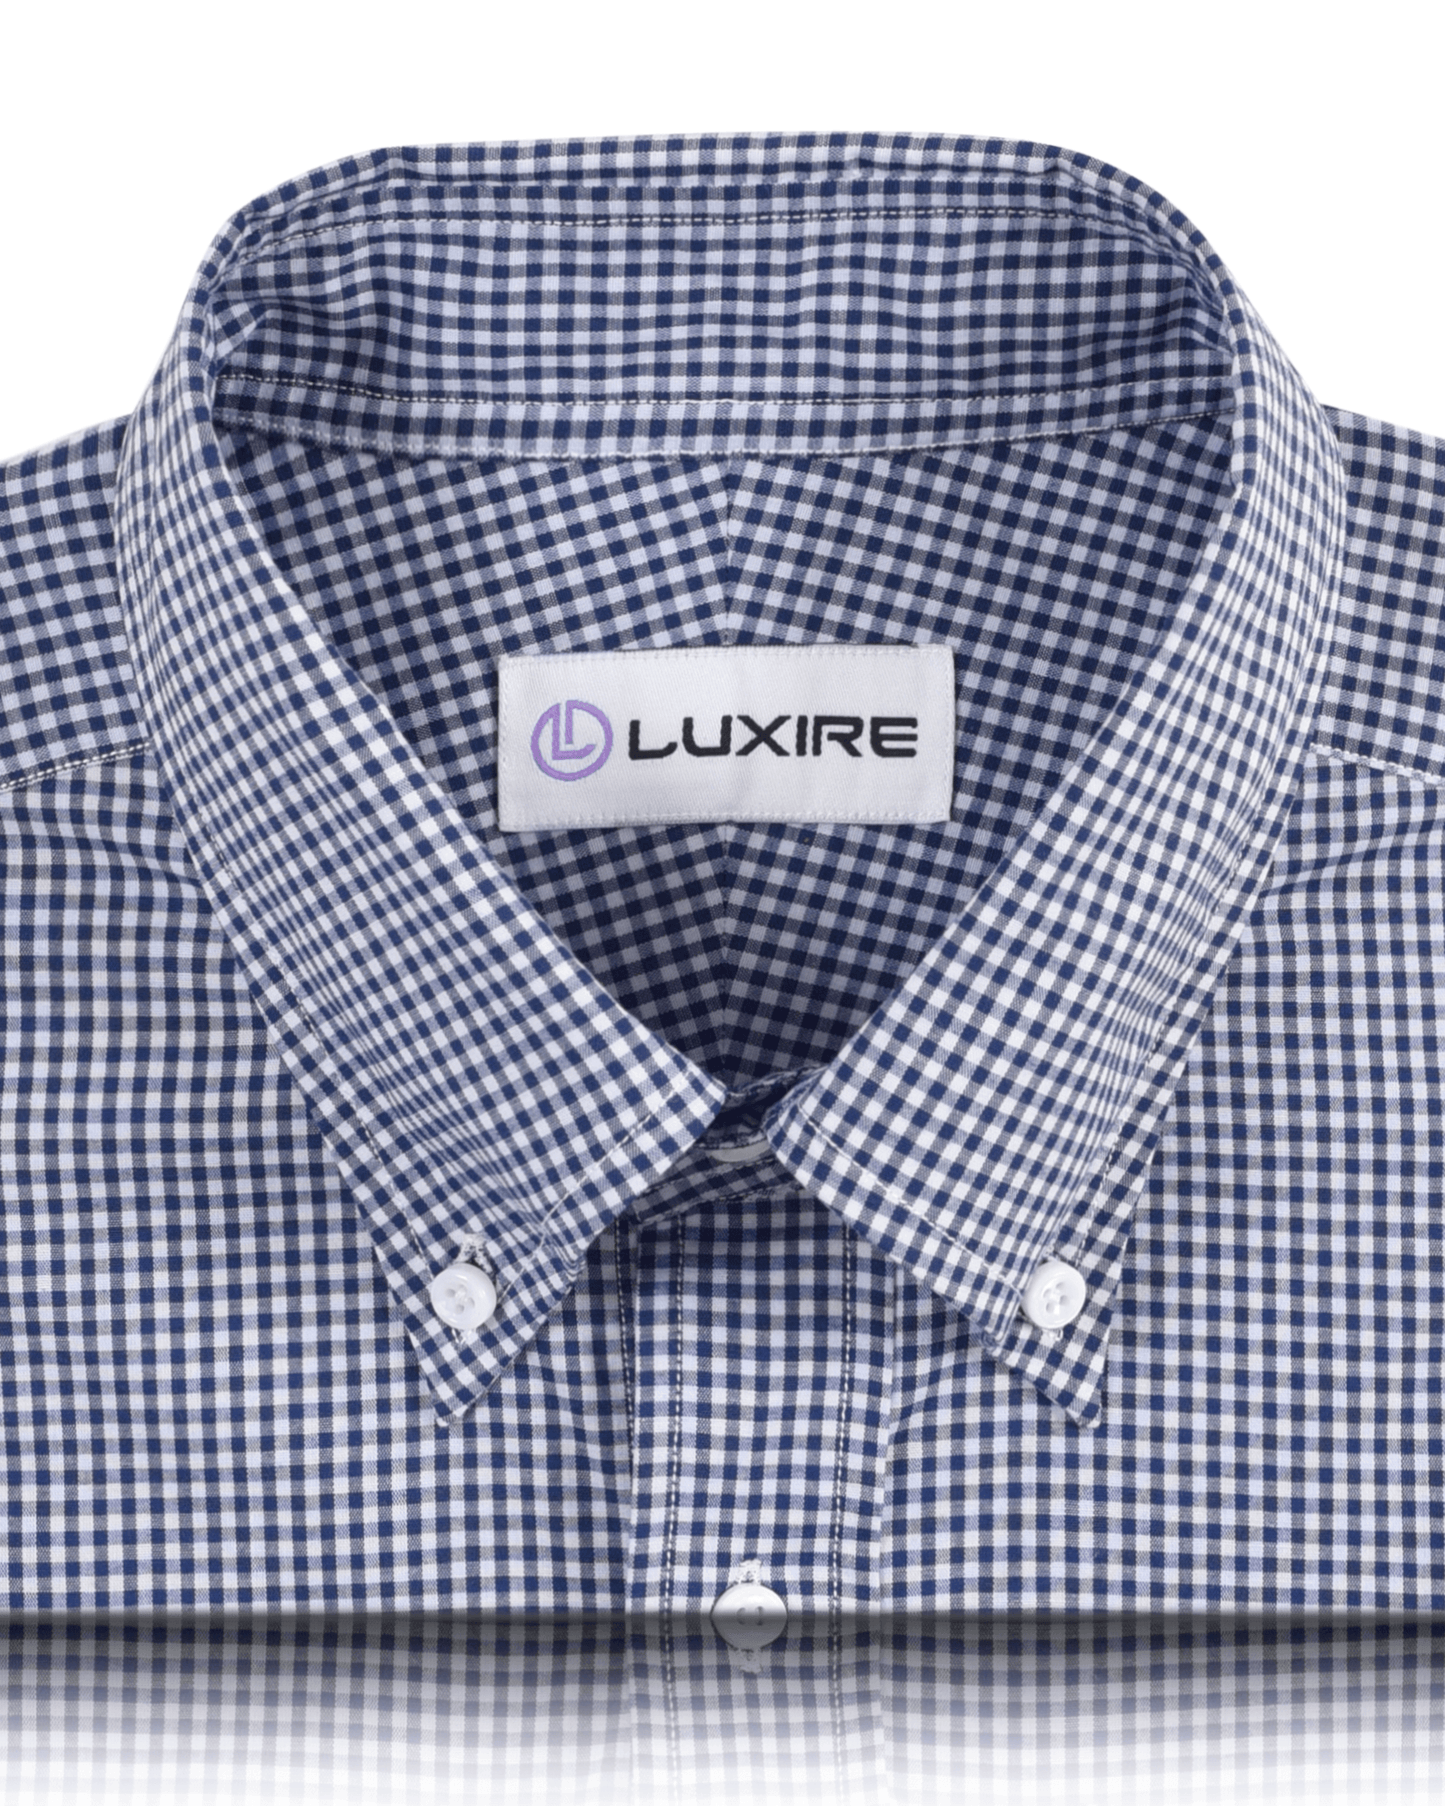 Collar of the custom oxford shirt for men by Luxire in blue gingham with checks